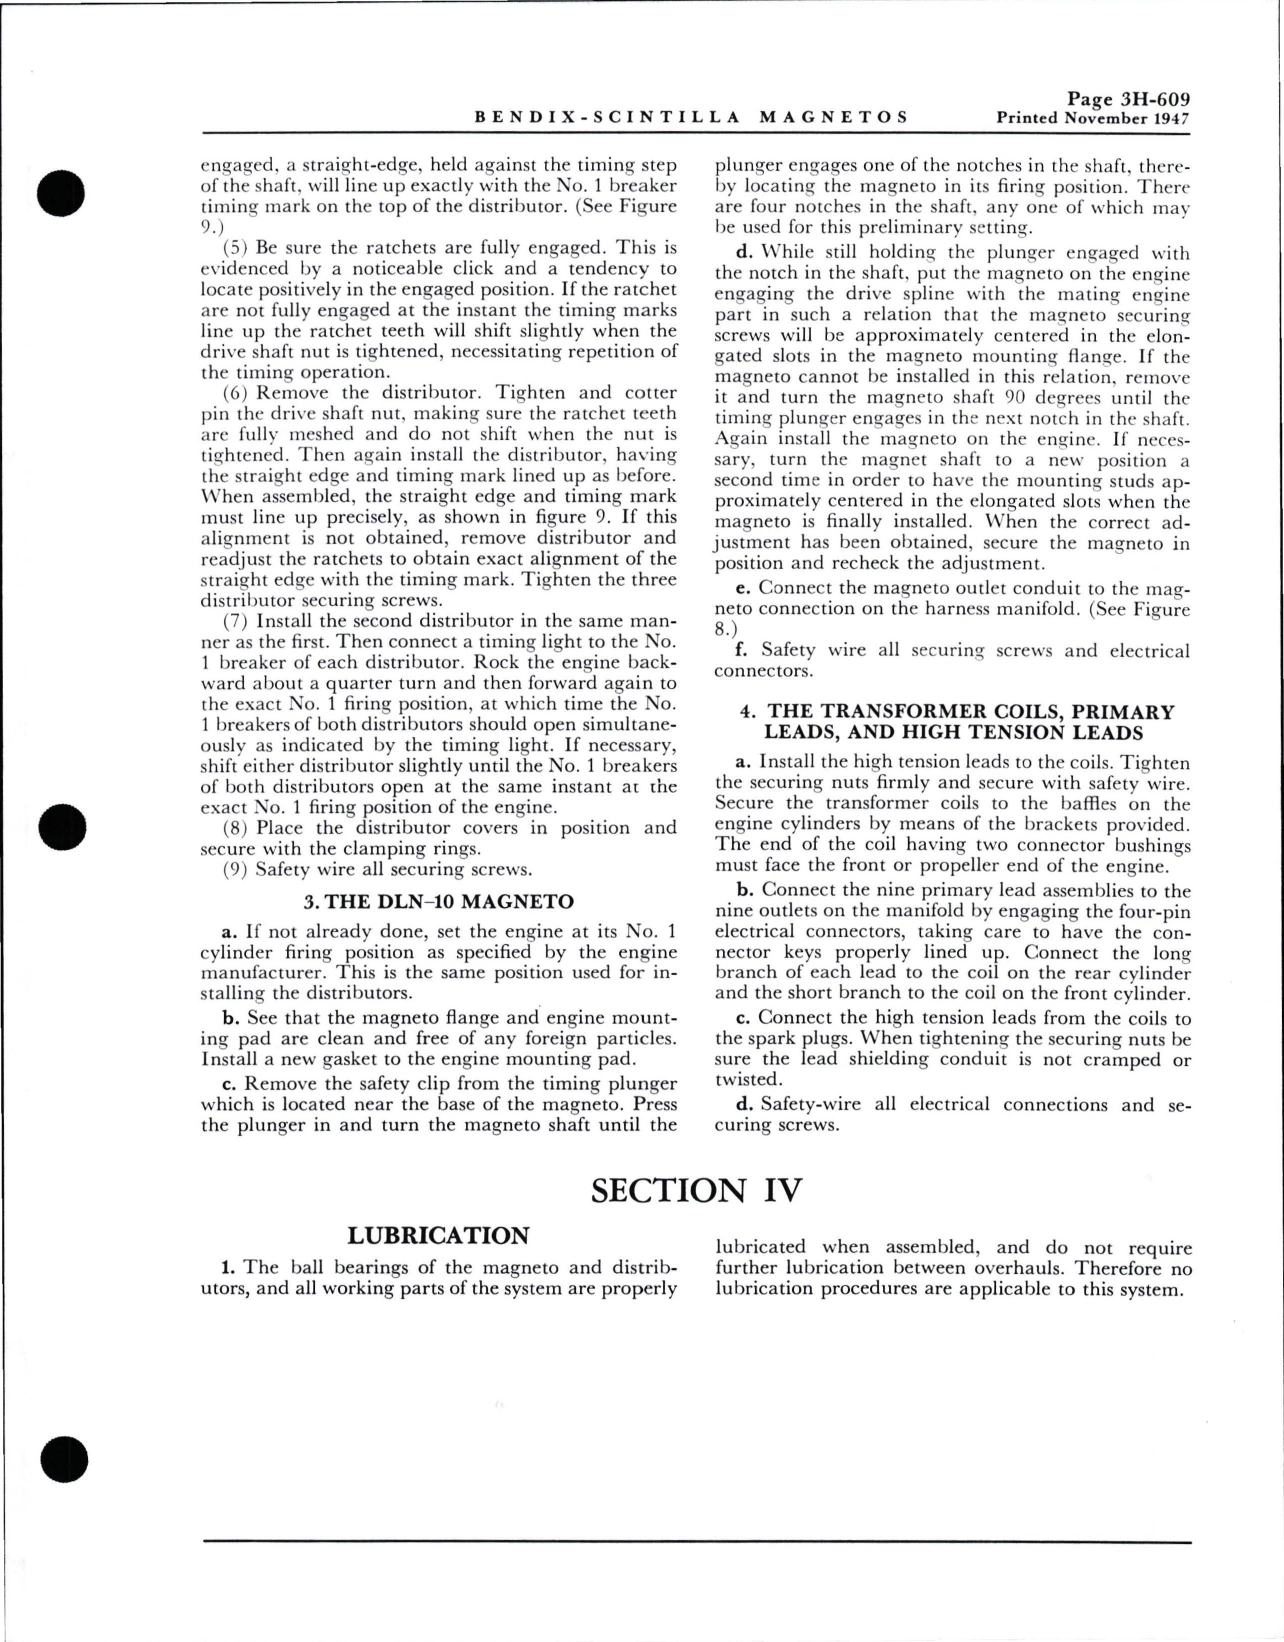 Sample page 9 from AirCorps Library document: Service Instructions for Bendix Scintilla Low Tension - High Altitude Ignition System used on Pratt & Whitney R-2800-C Engines